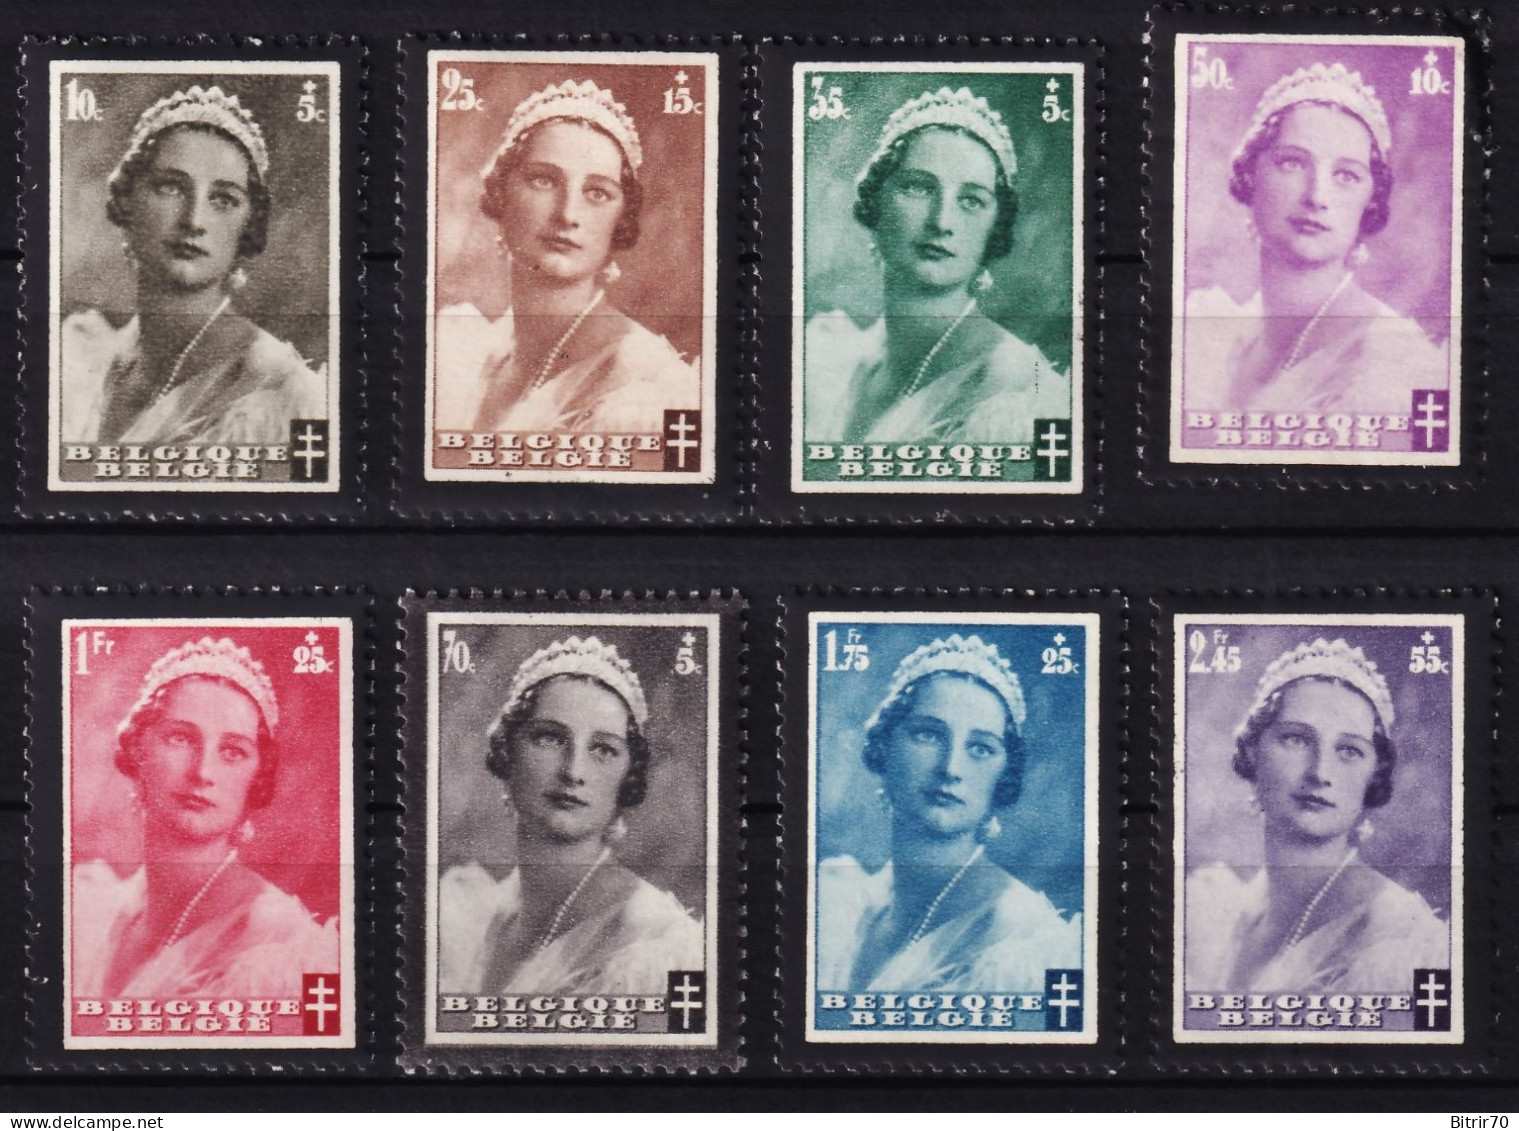 Belgica, 1935 Y&T. 411 / 418, MNH. - Unused Stamps